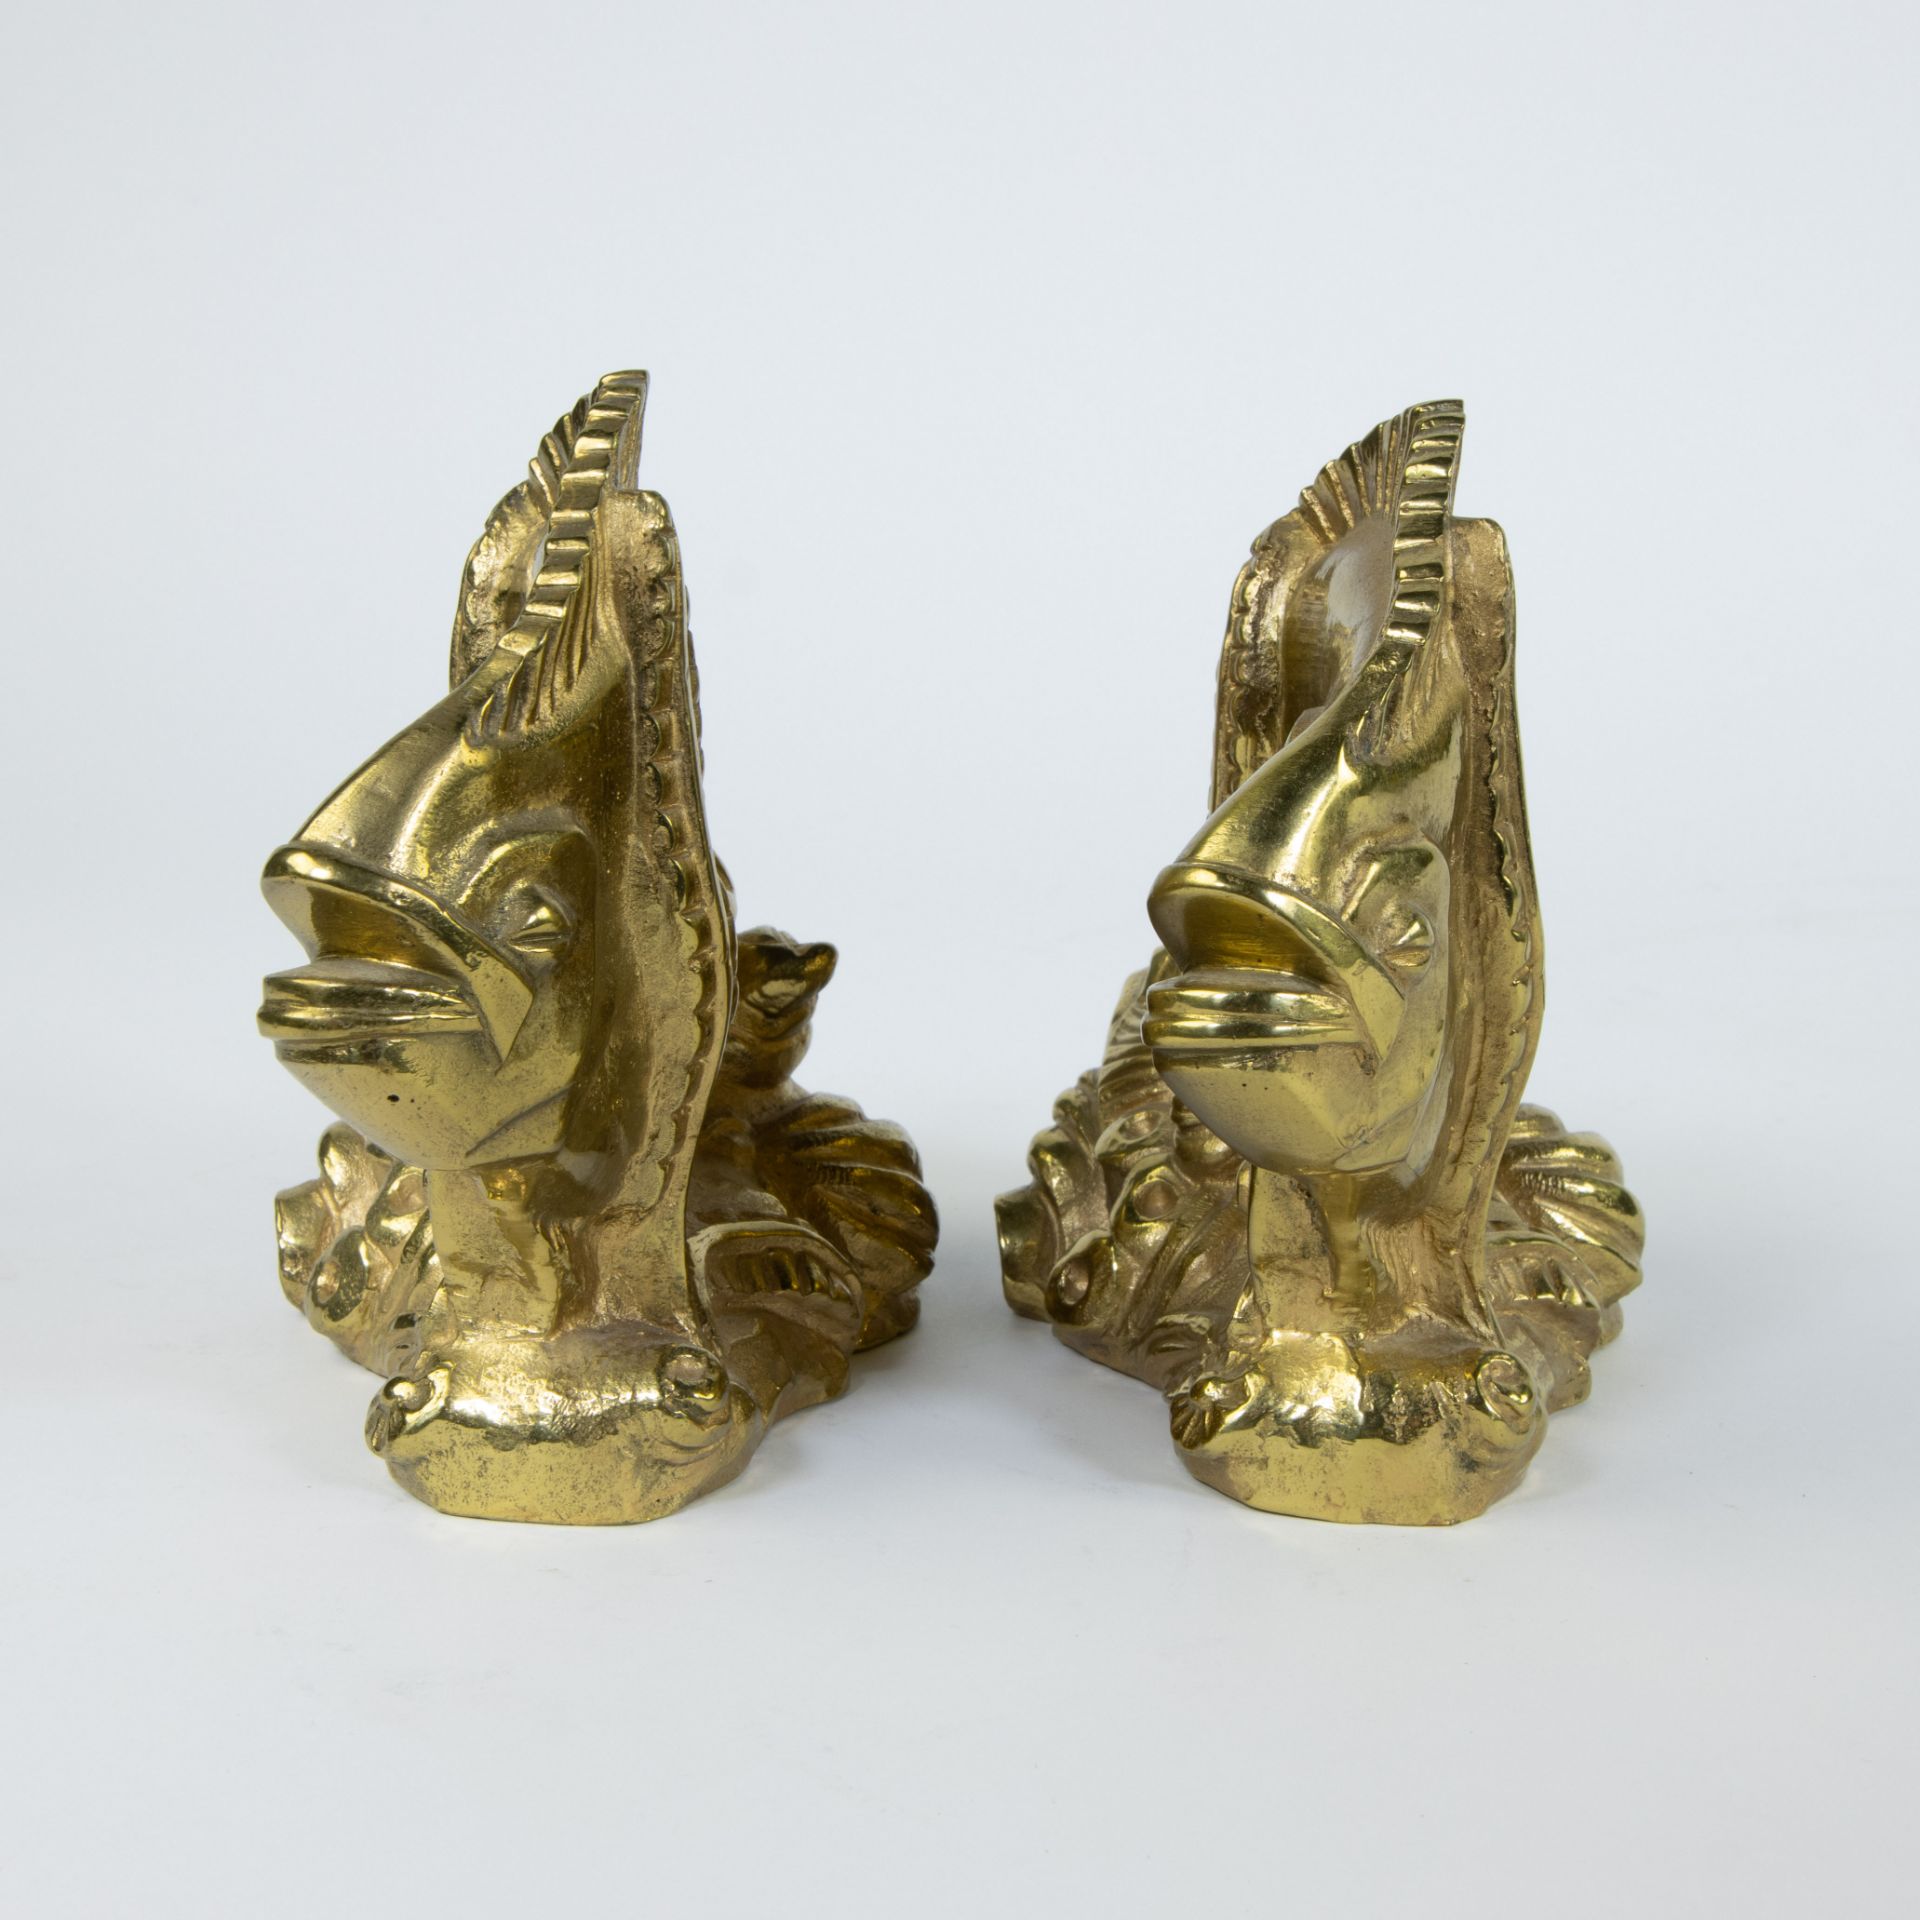 Pair of Art Deco gilded bronze bookends in the shape of fish - Image 2 of 4